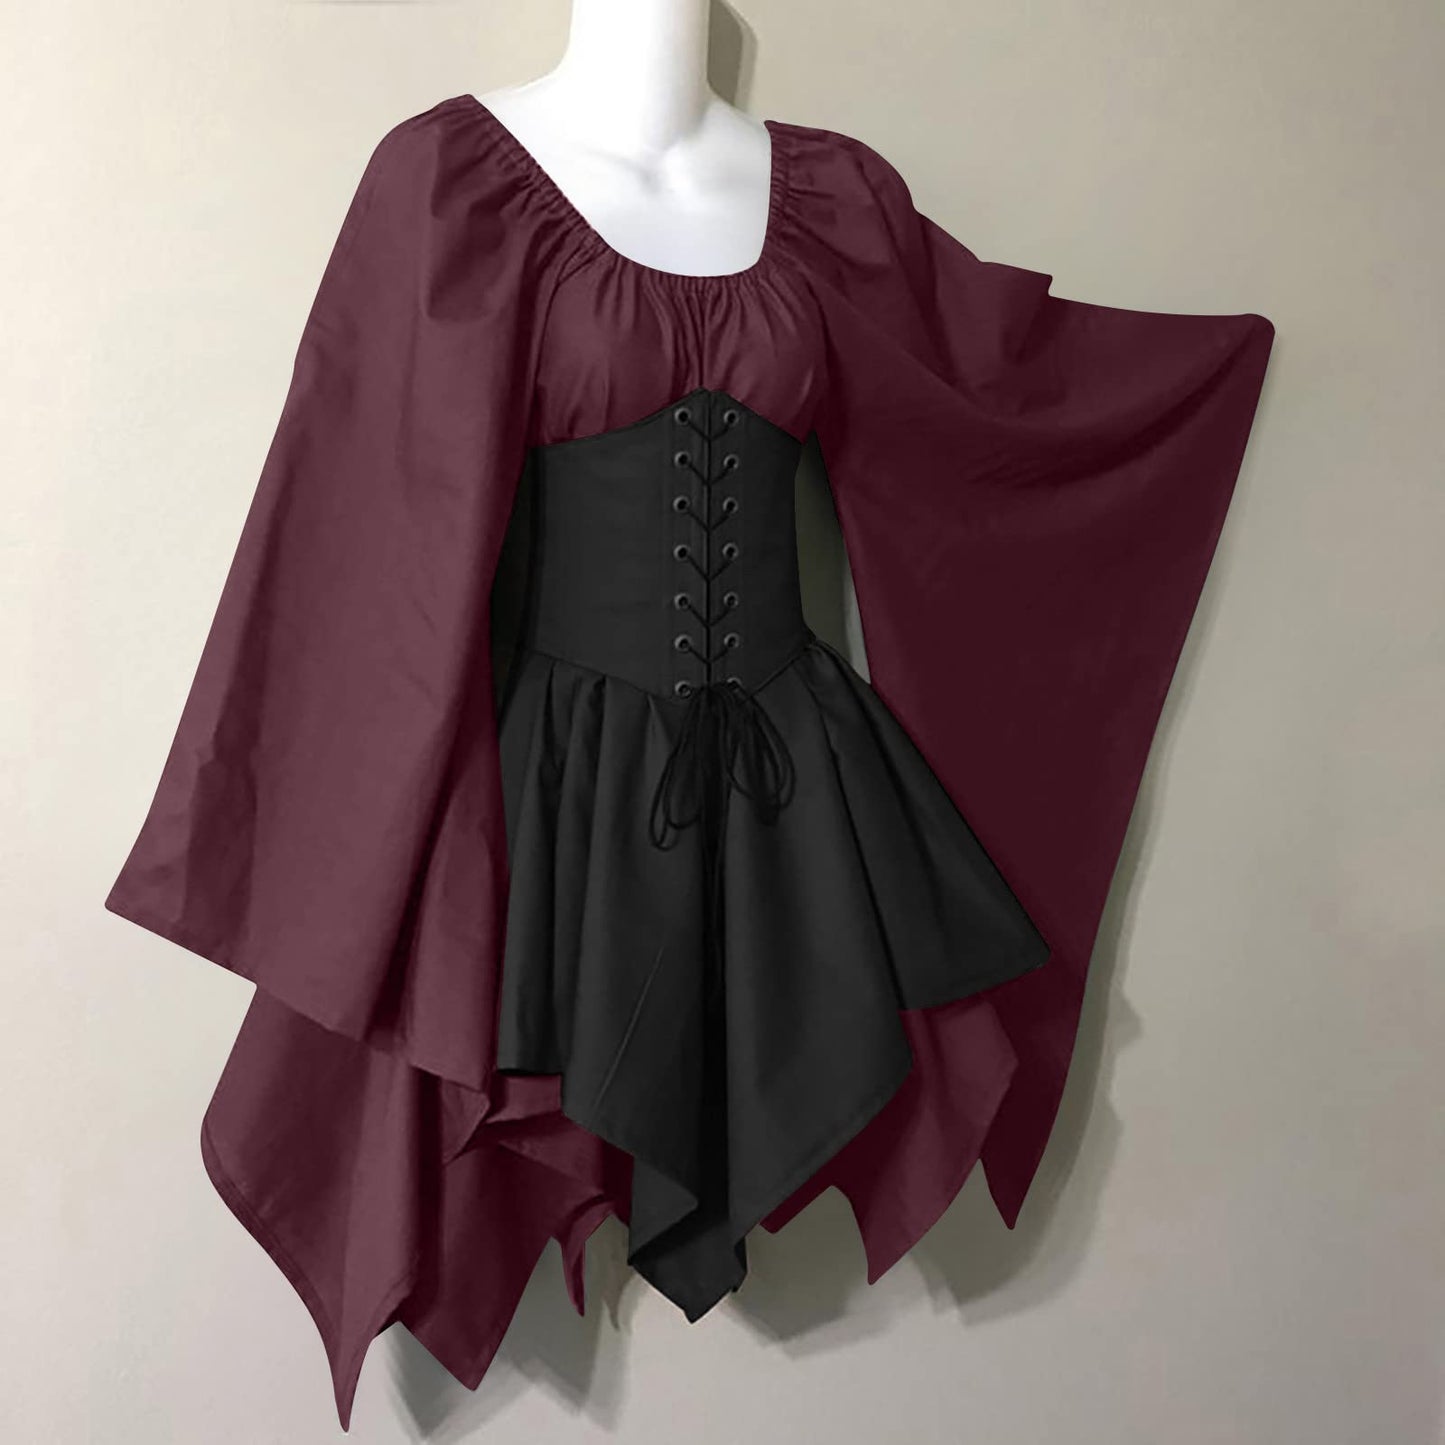 Red Retro Gothic Witch Medieval Cosplay Dress for Women